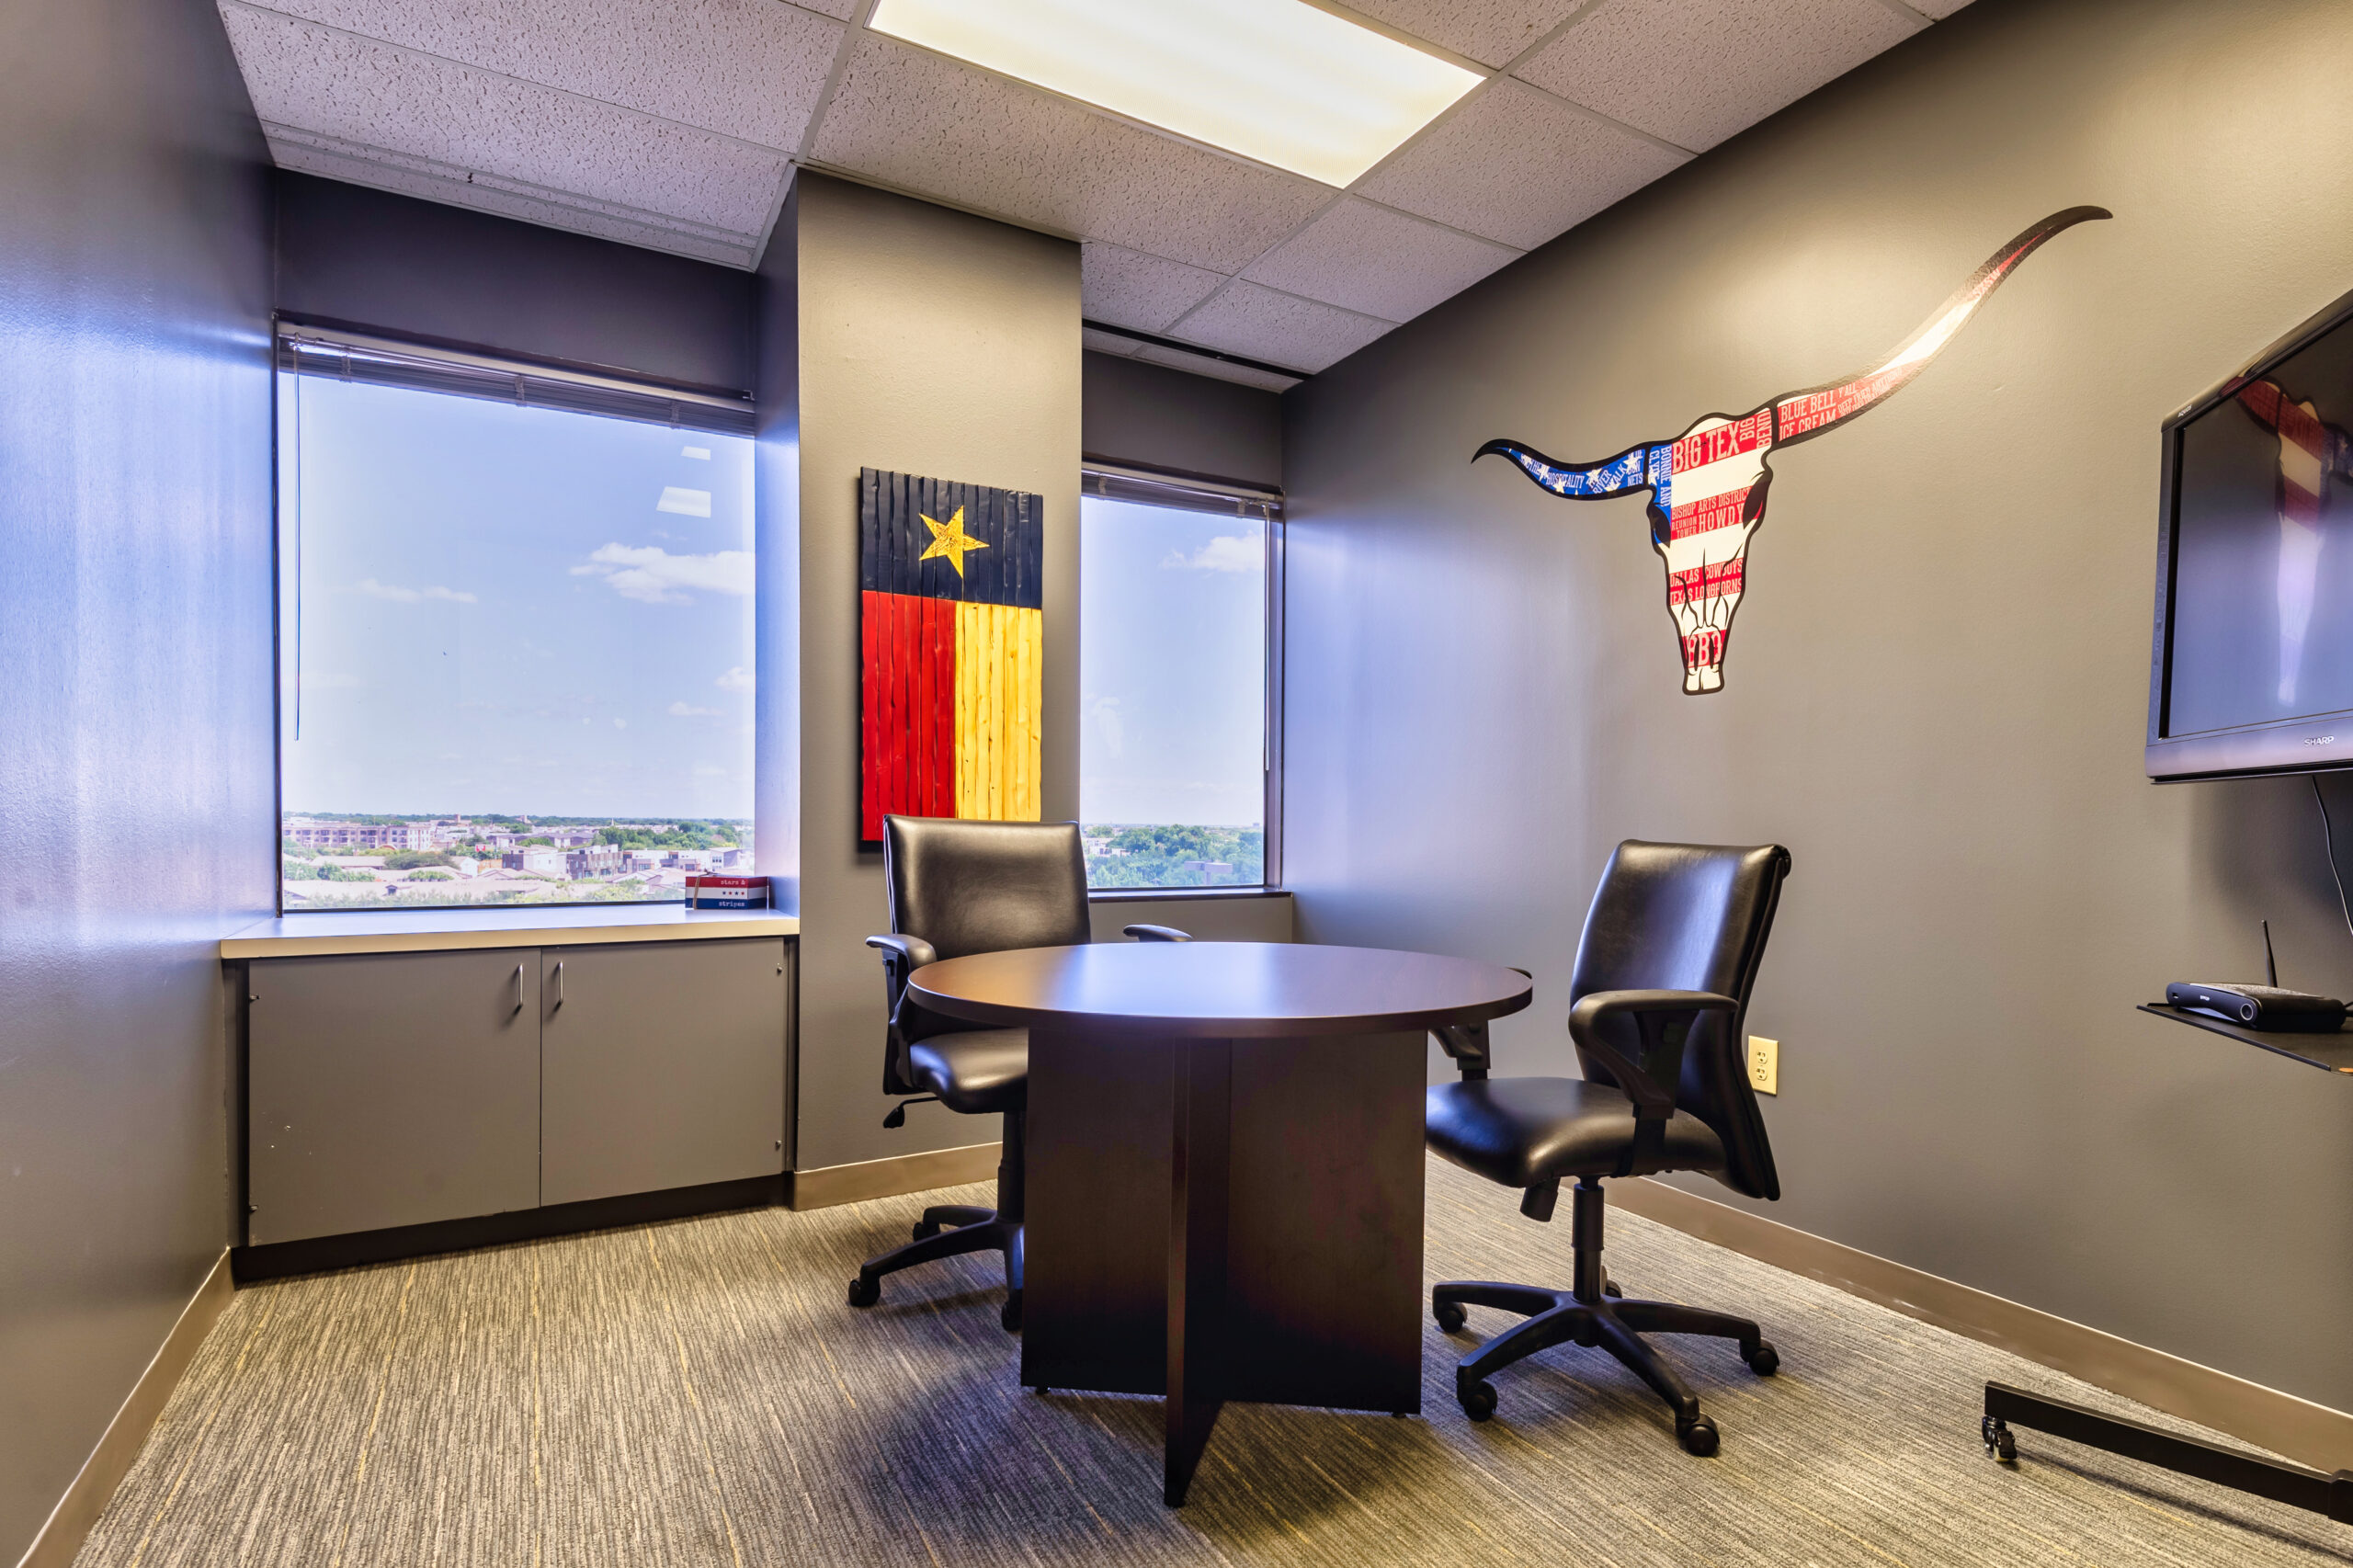 Office space for rent in Dallas. Meeting space has large windows, desk and 2 chairs.